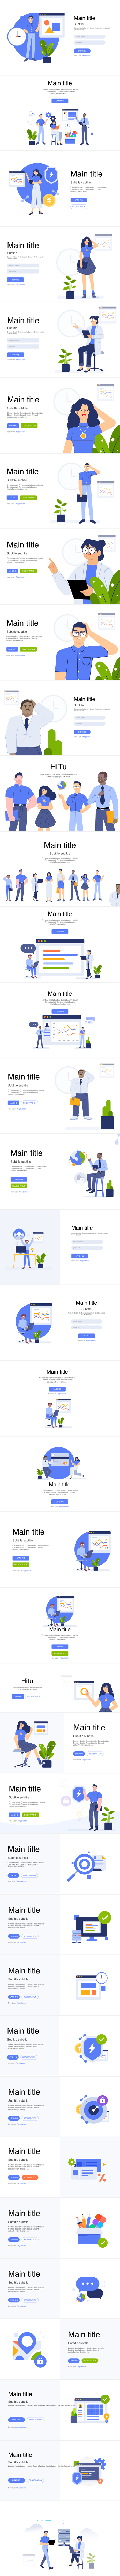 Hitu Free Illustration Components for Figma - HiTu aims to modularize layout, color, shapes, and a series of design guidelines to help designers fulfill illustration requests gracefully and fast.